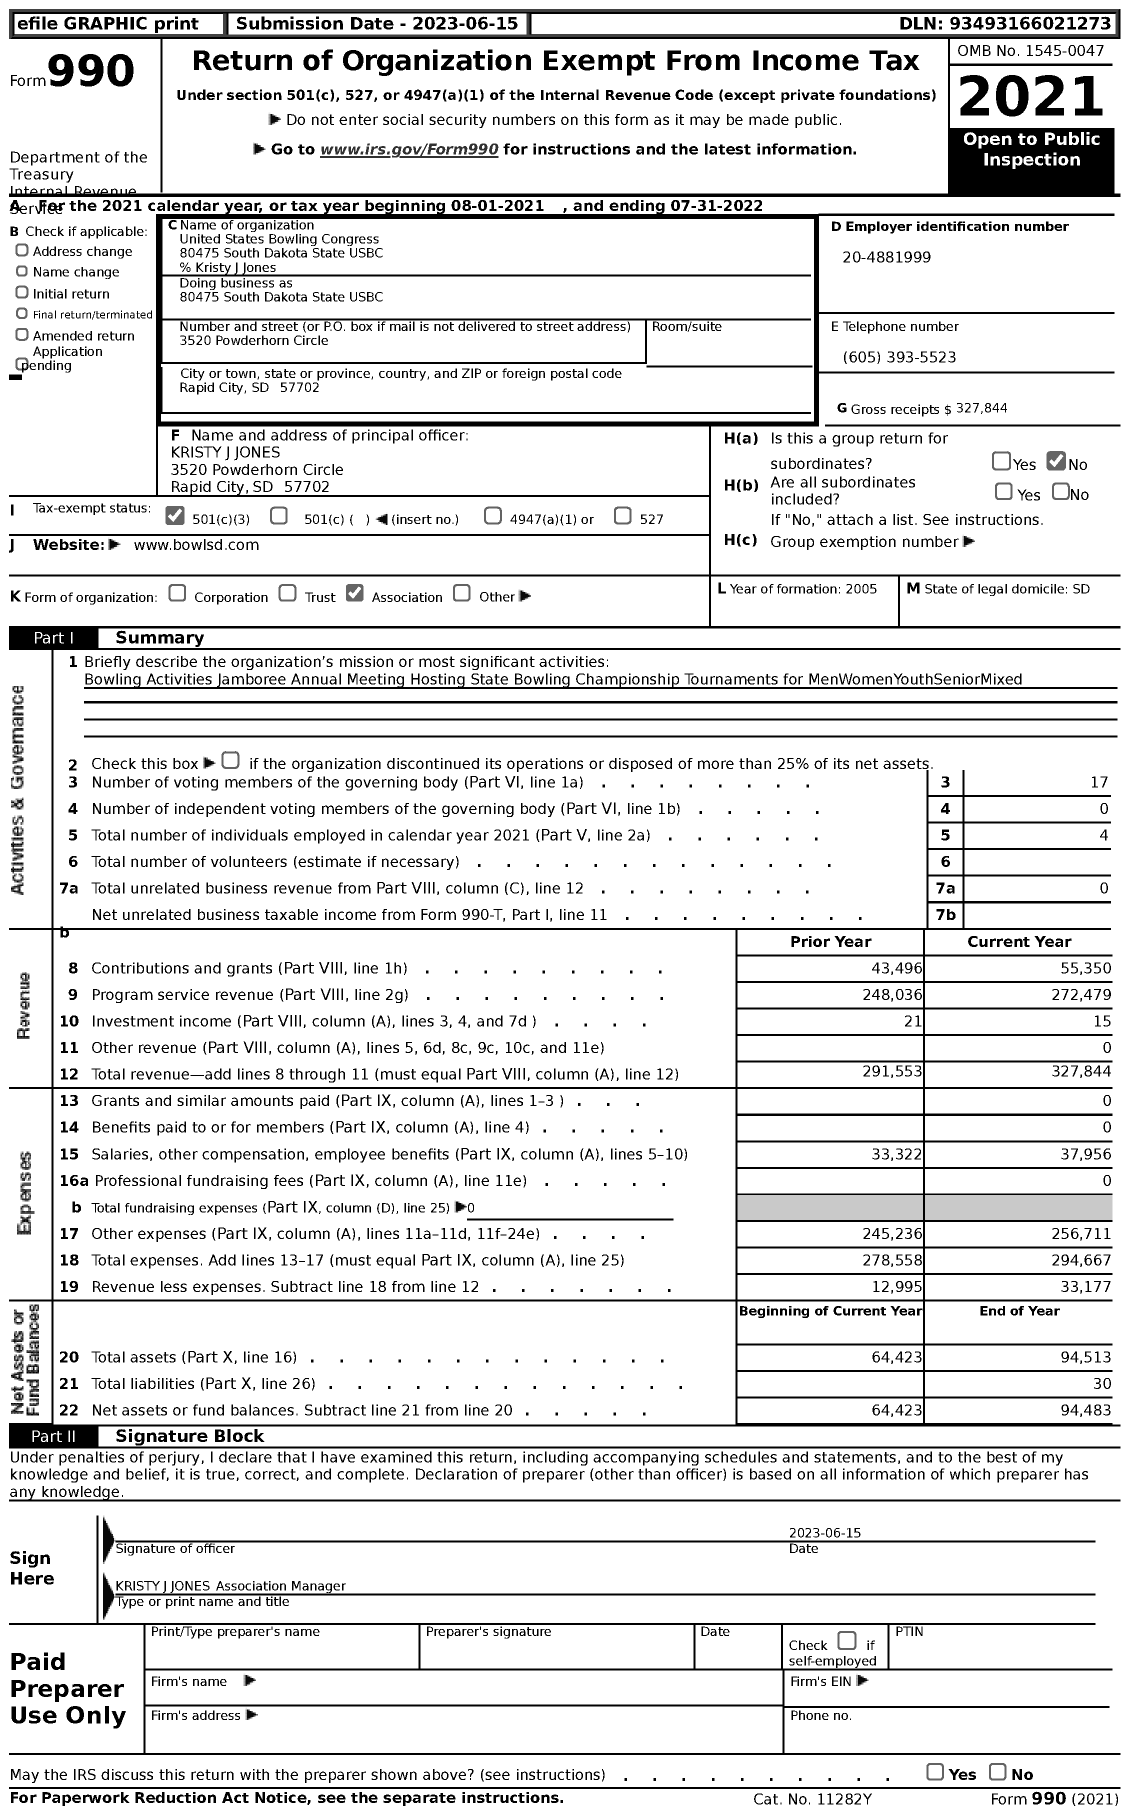 Image of first page of 2021 Form 990 for United States Bowling Congress - 80475 South Dakota State USBC